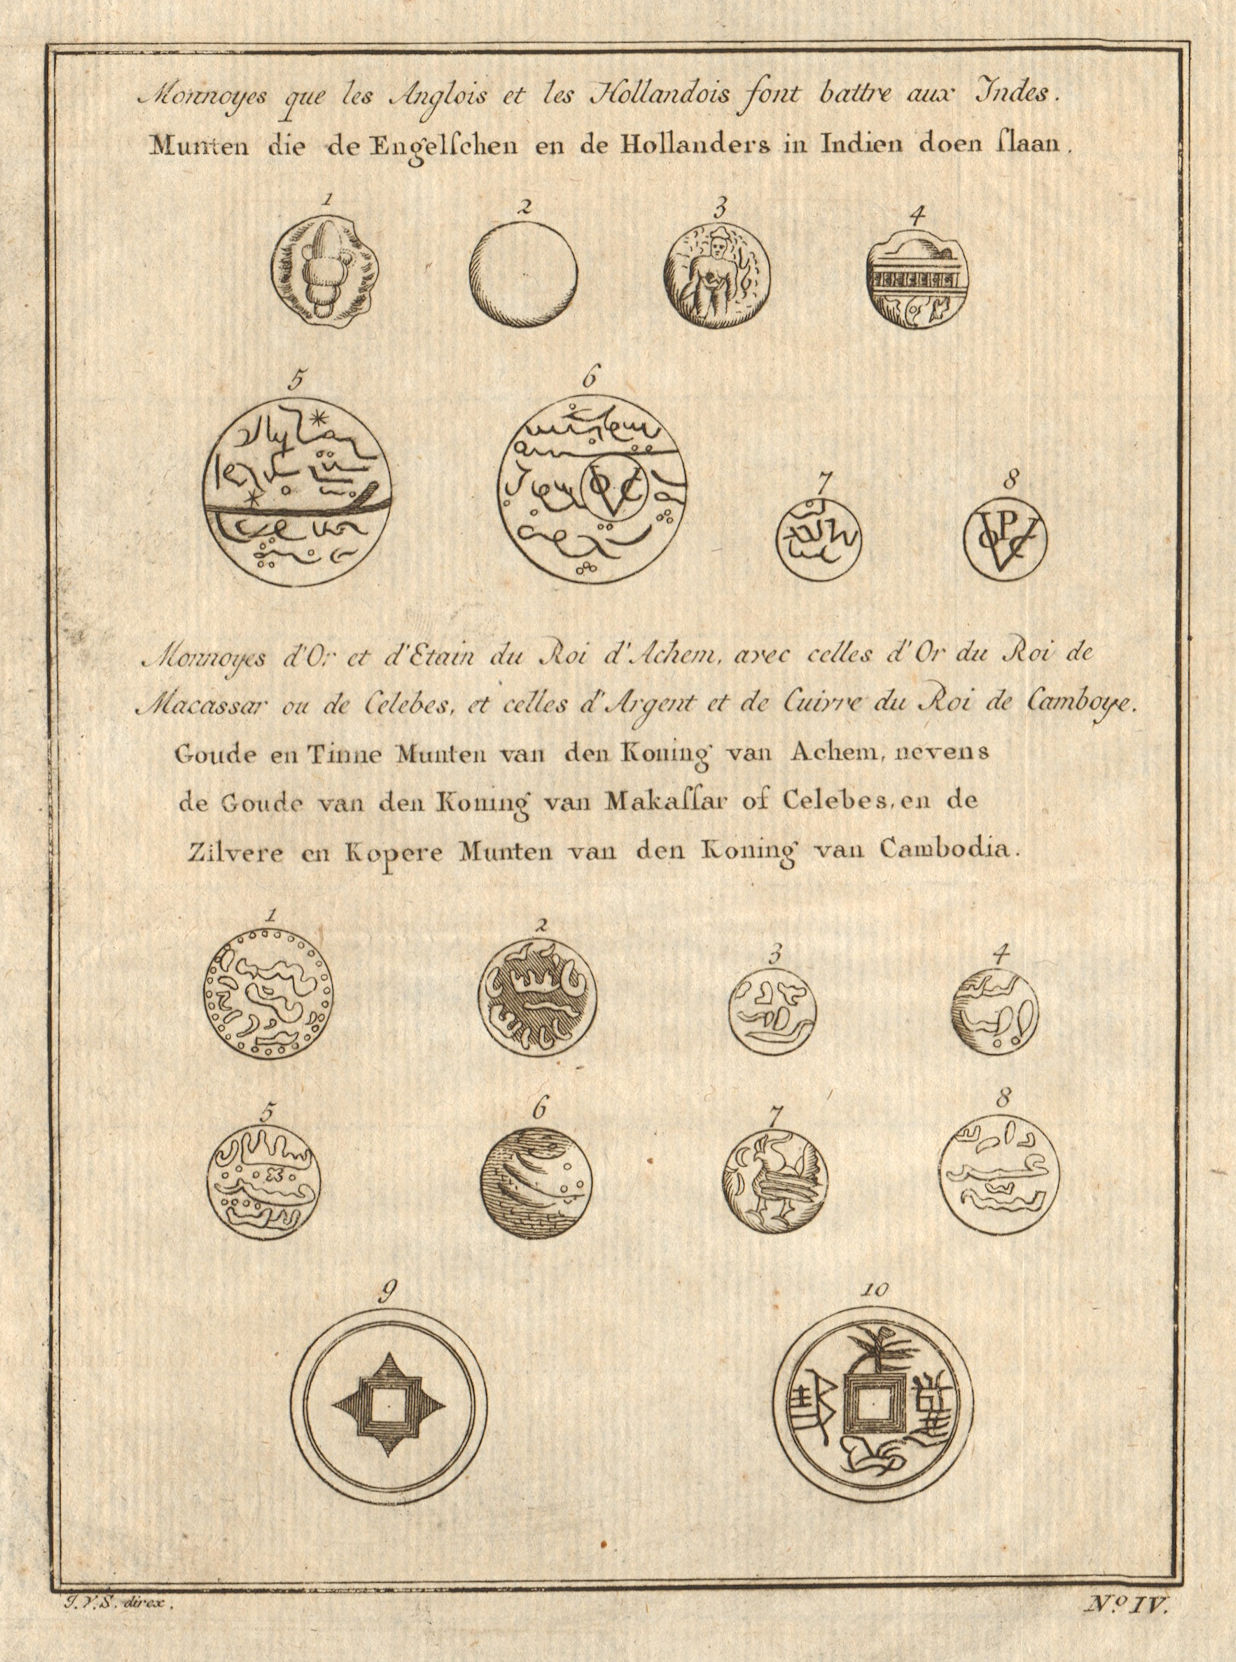 Coins. English/Dutch East Indies. Aceh, Makassar Sulawesi, Cambodia. SCHLEY 1755